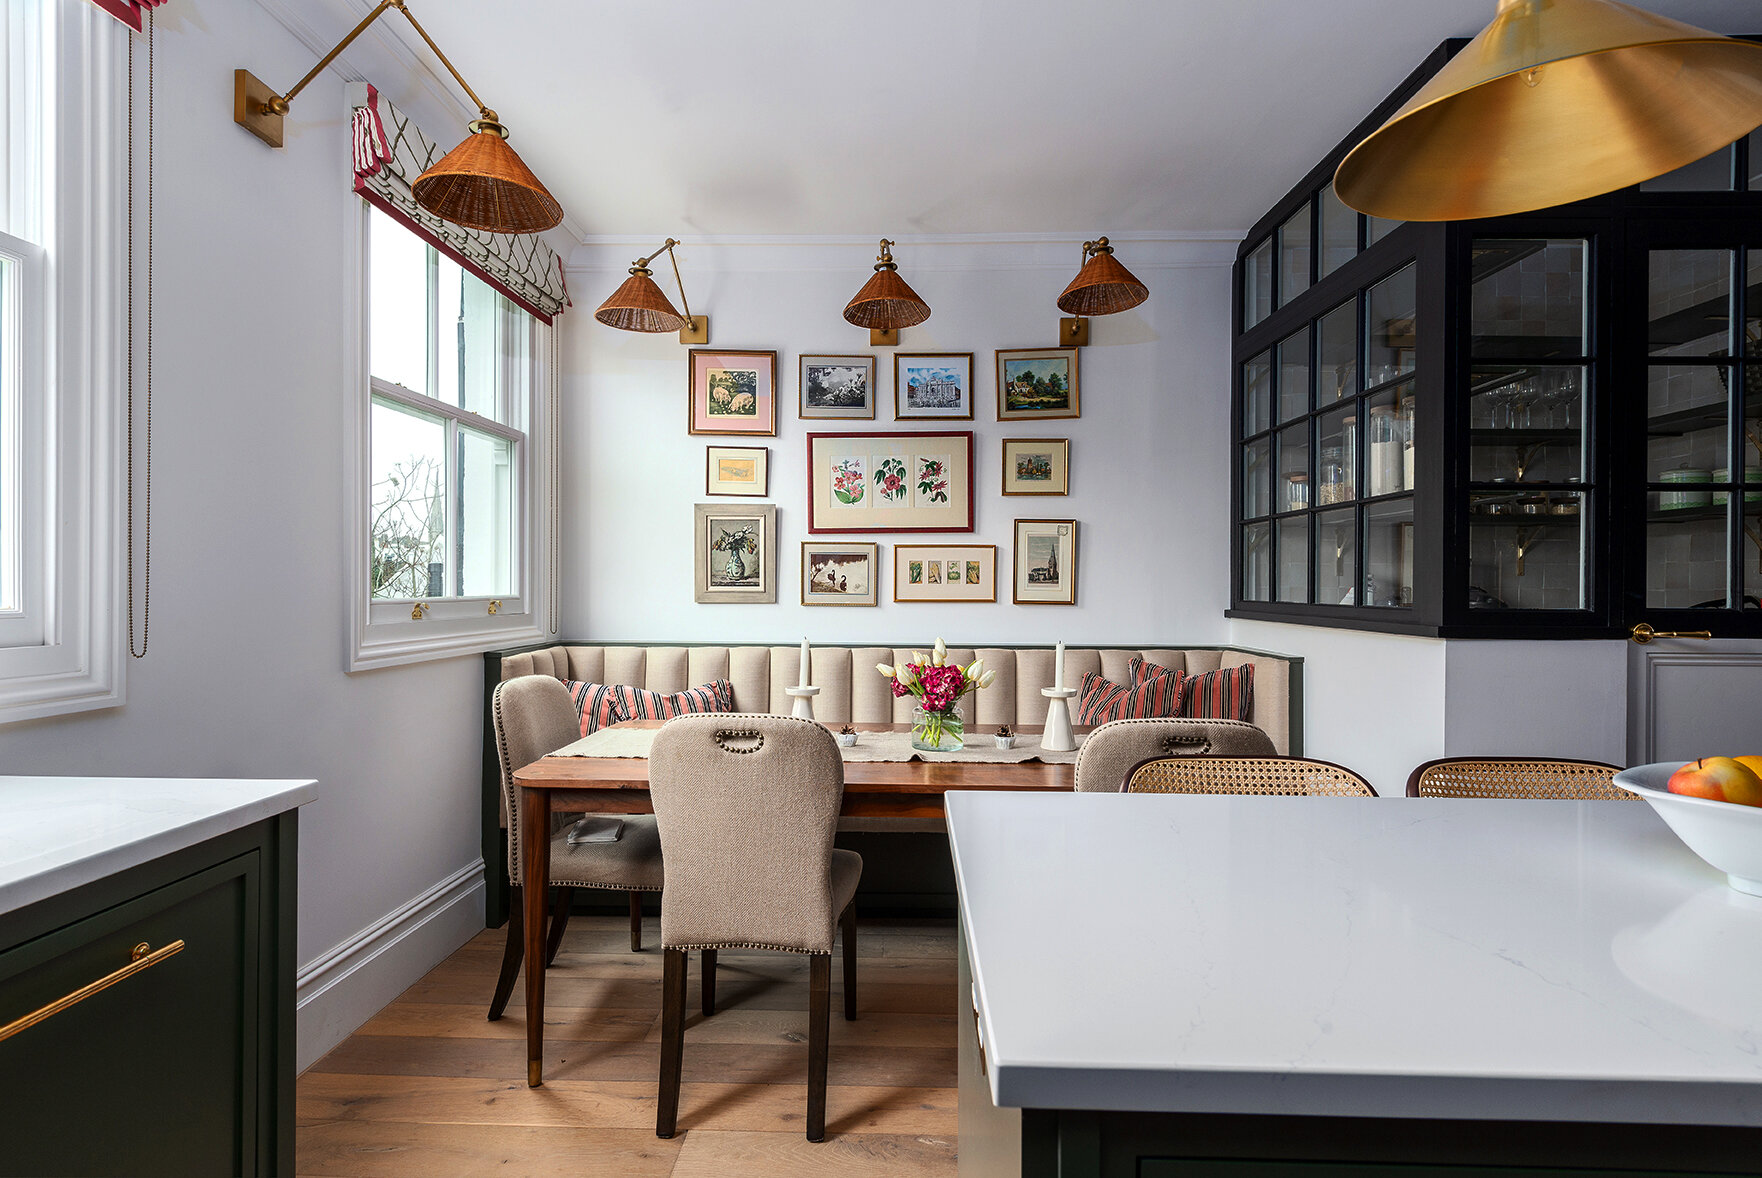 Kitchen Trends: Banquette Seating